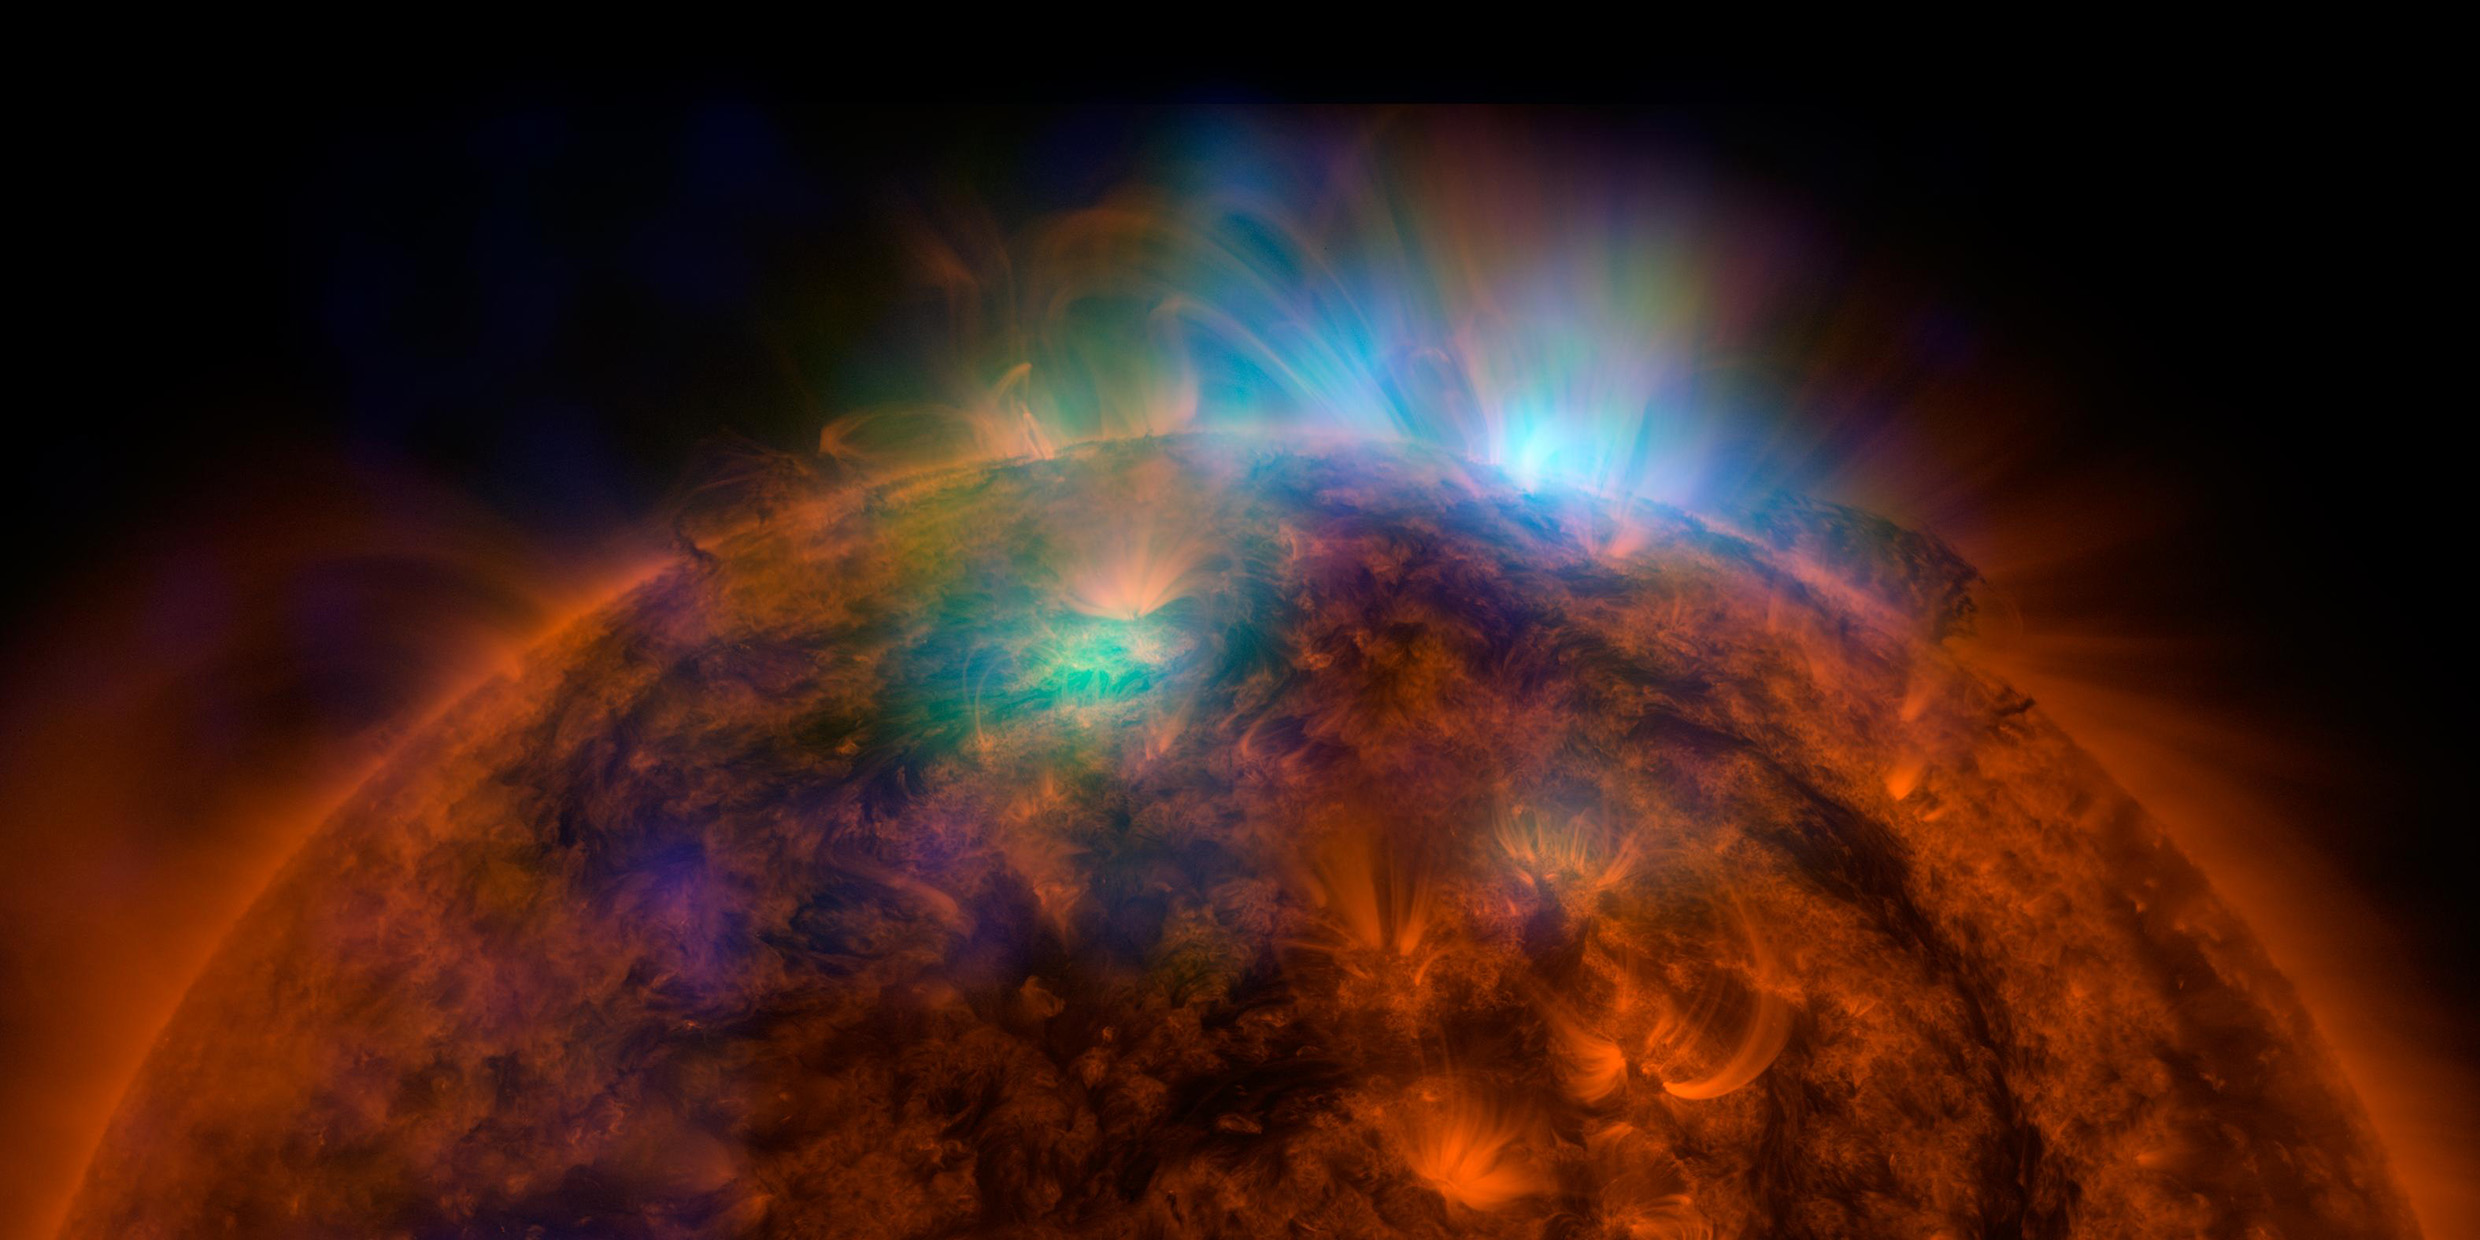 Image of the Sun in X-rays